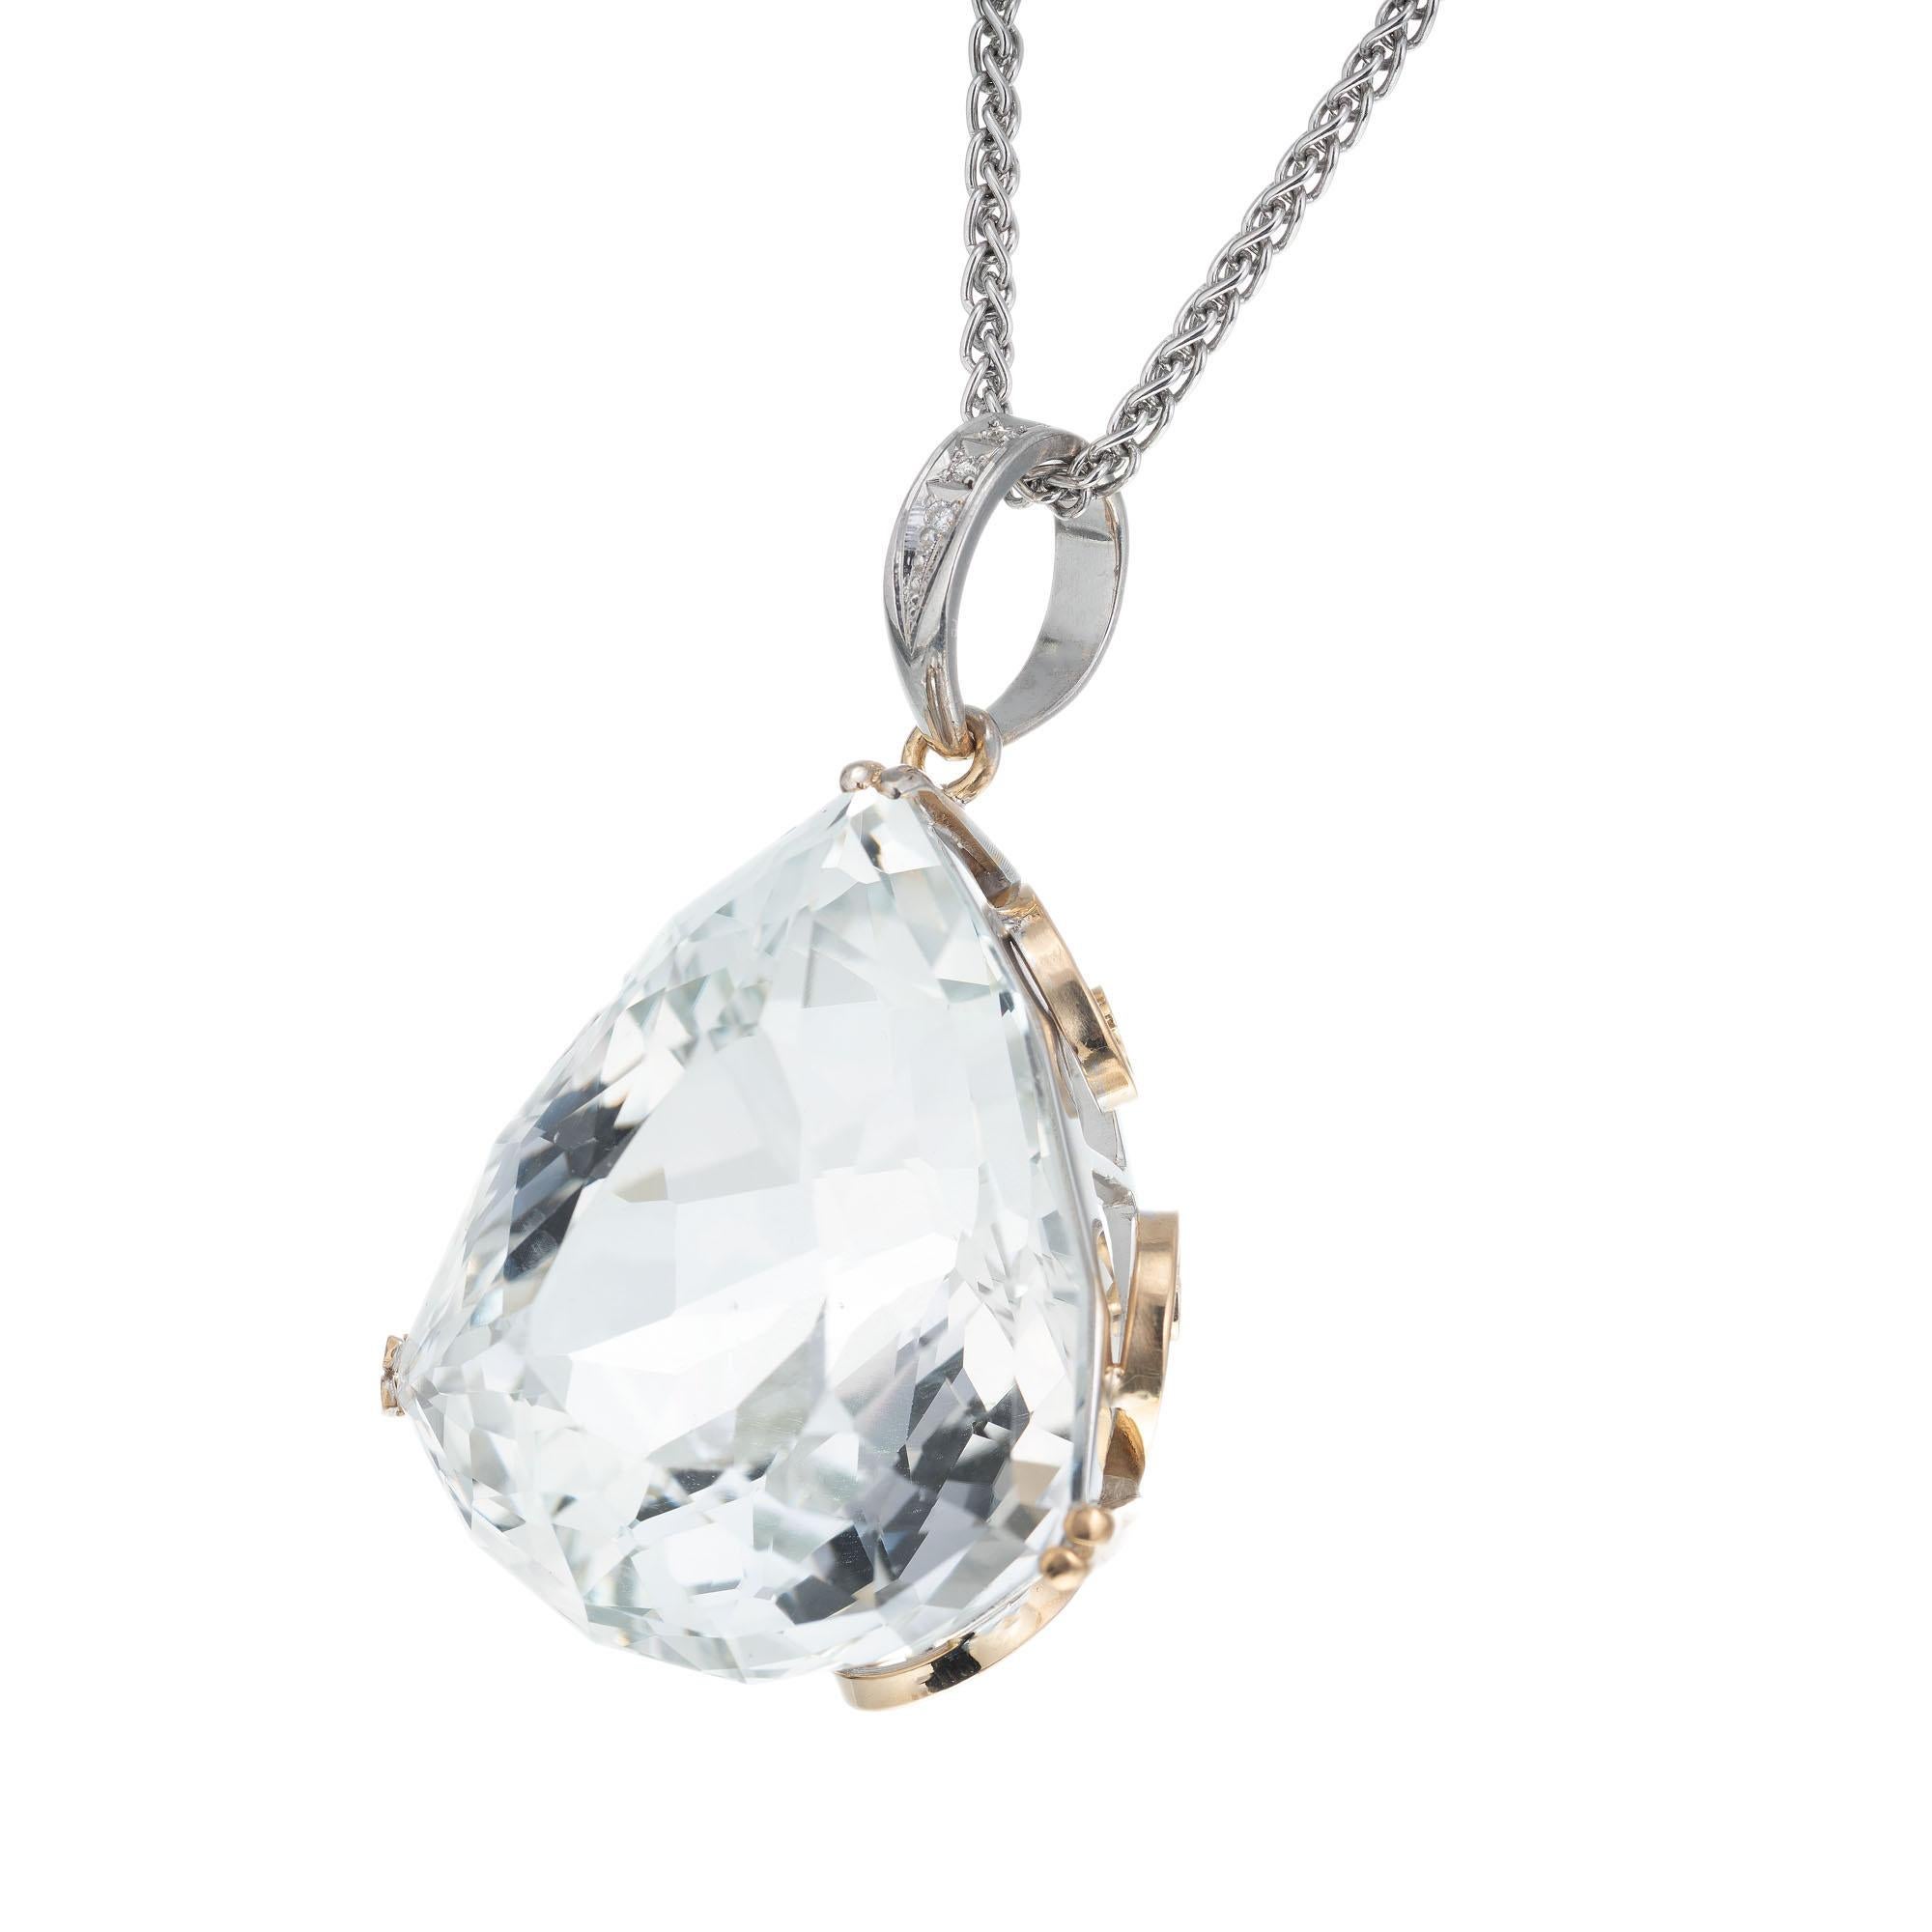 GIA certified large 133.28 carat natural topaz modified pear shape pendant with a diamond bail. Handmade 18k yellow and white gold setting with a 17 inch white gold chain.  

1 pear brilliant shape topaz VS, approx. 133.28cts GIA Certificate #